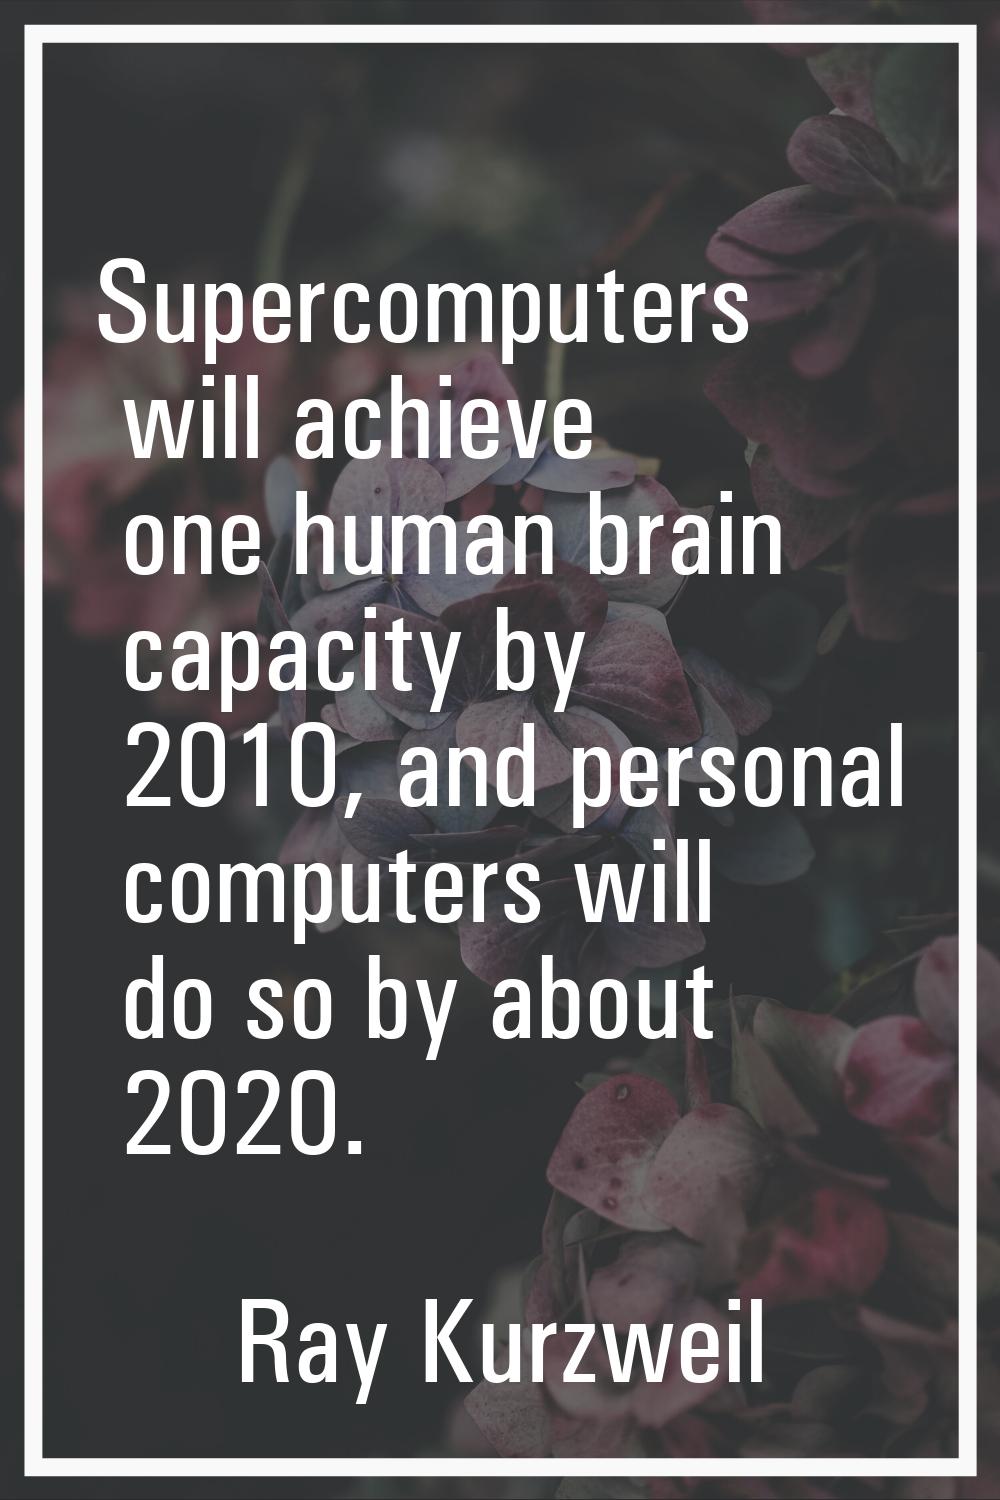 Supercomputers will achieve one human brain capacity by 2010, and personal computers will do so by 